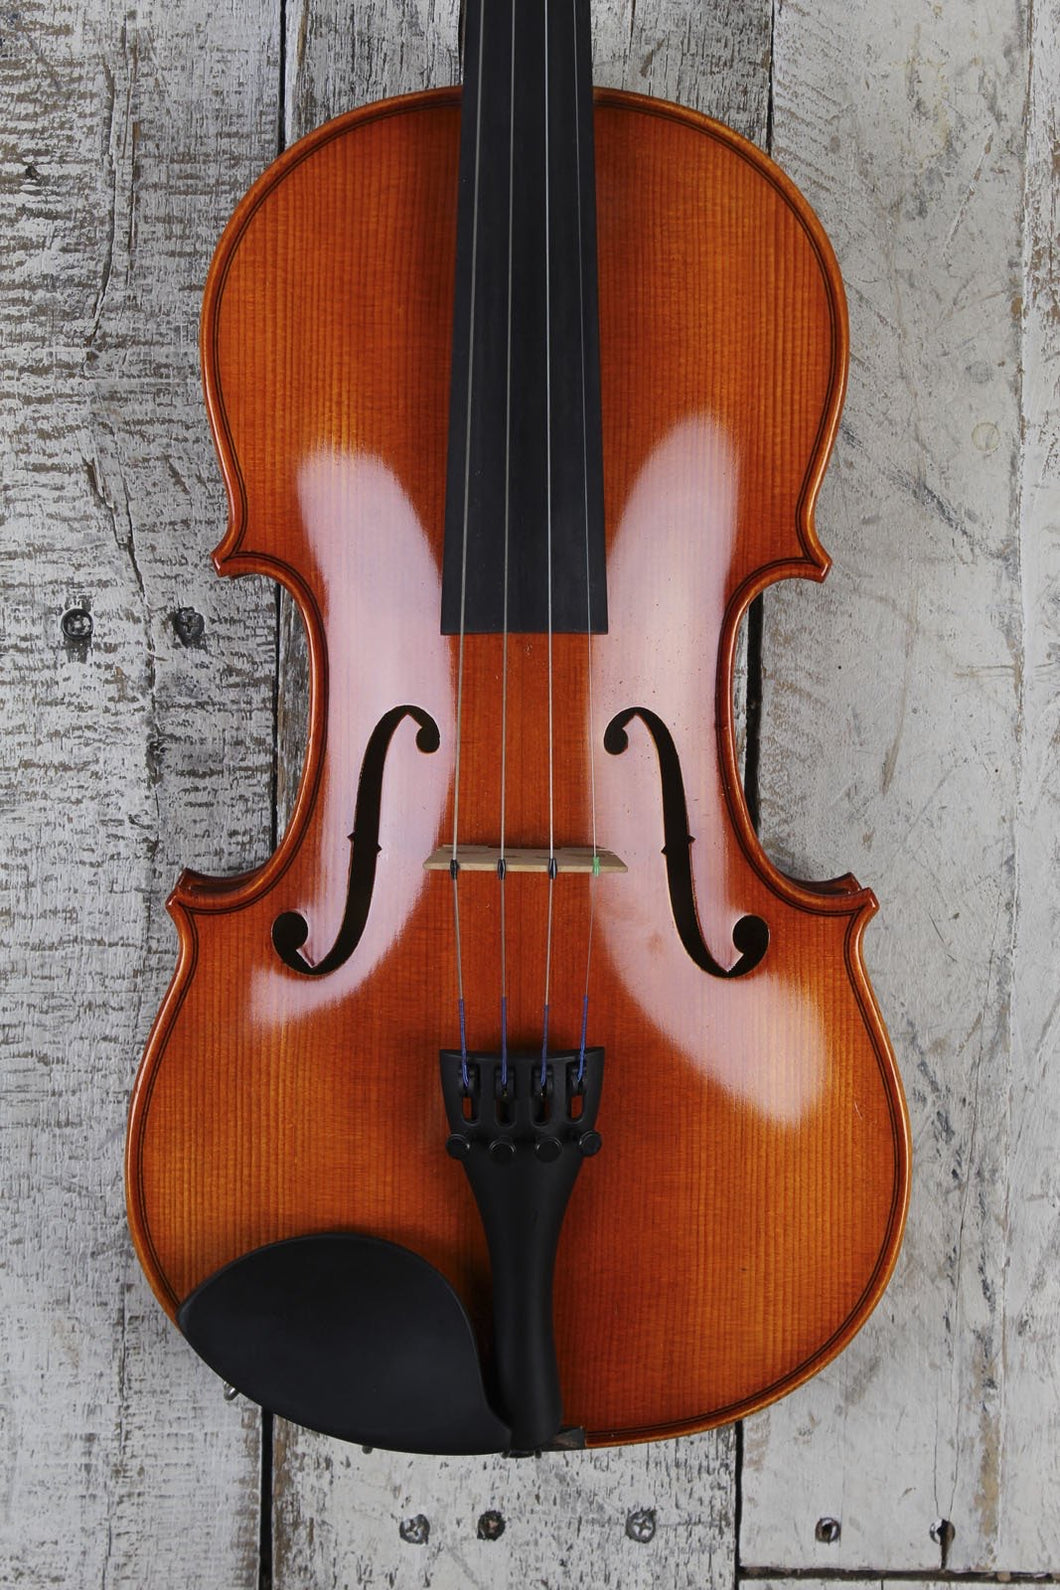 Samuel Eastman VL100 4/4 Violin with Hardshell Case and Bow – The 